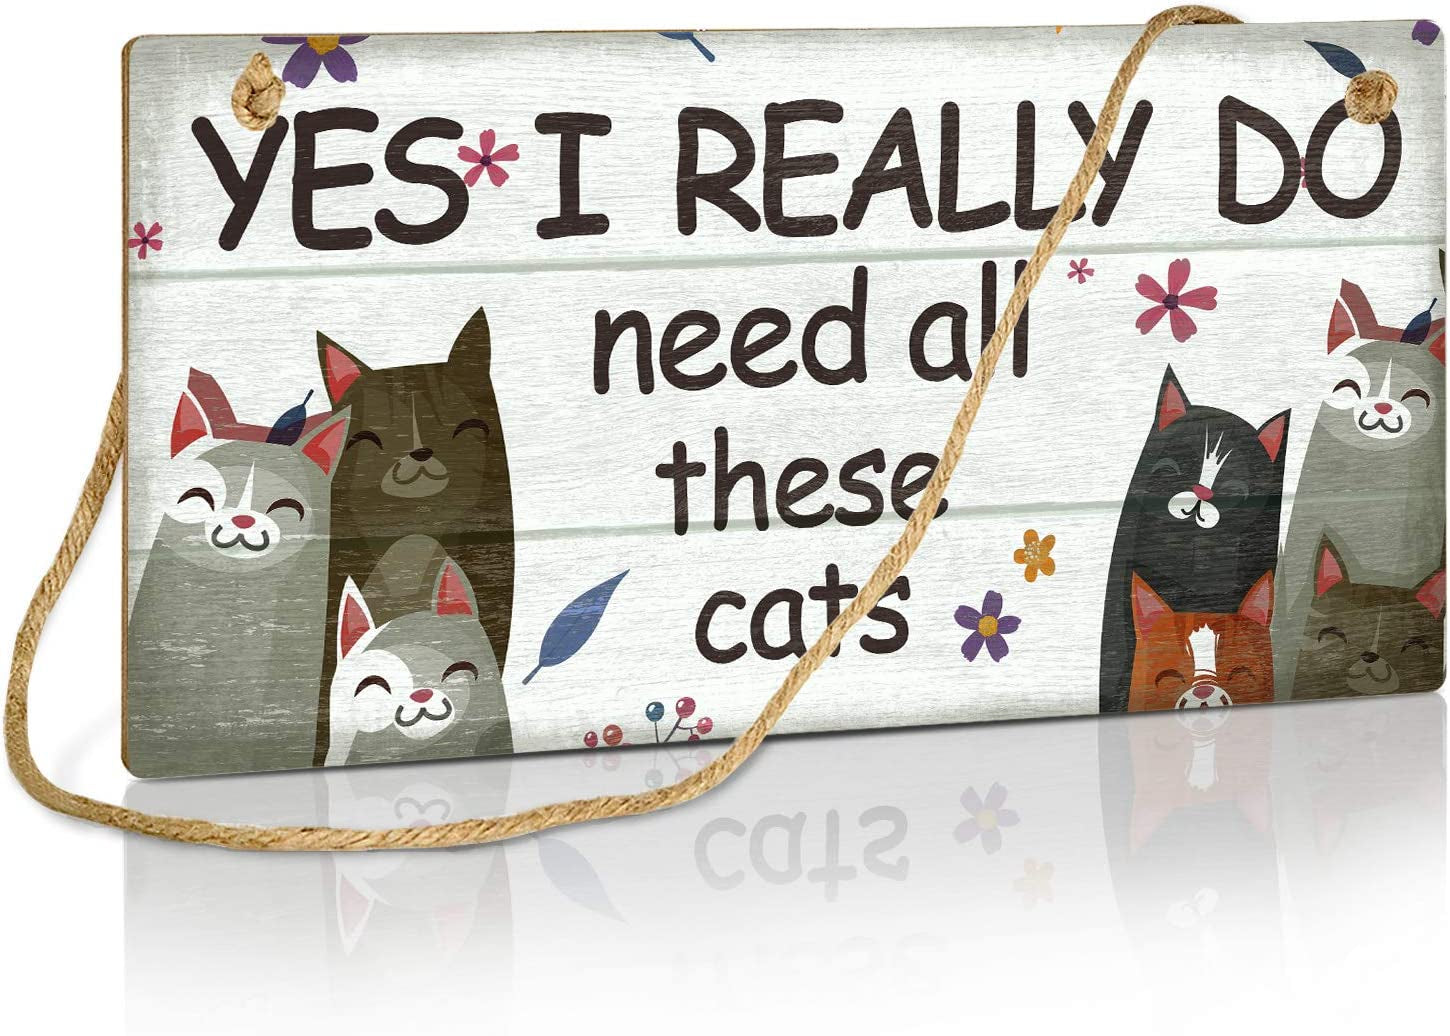 Cat Sign, Funny Home Decor for Bedroom, Living Room, Porch, Gift for Cat Lovers, 10X5 Inches Wall Hanging Plaque - Yes I Really Do Need All These Cats